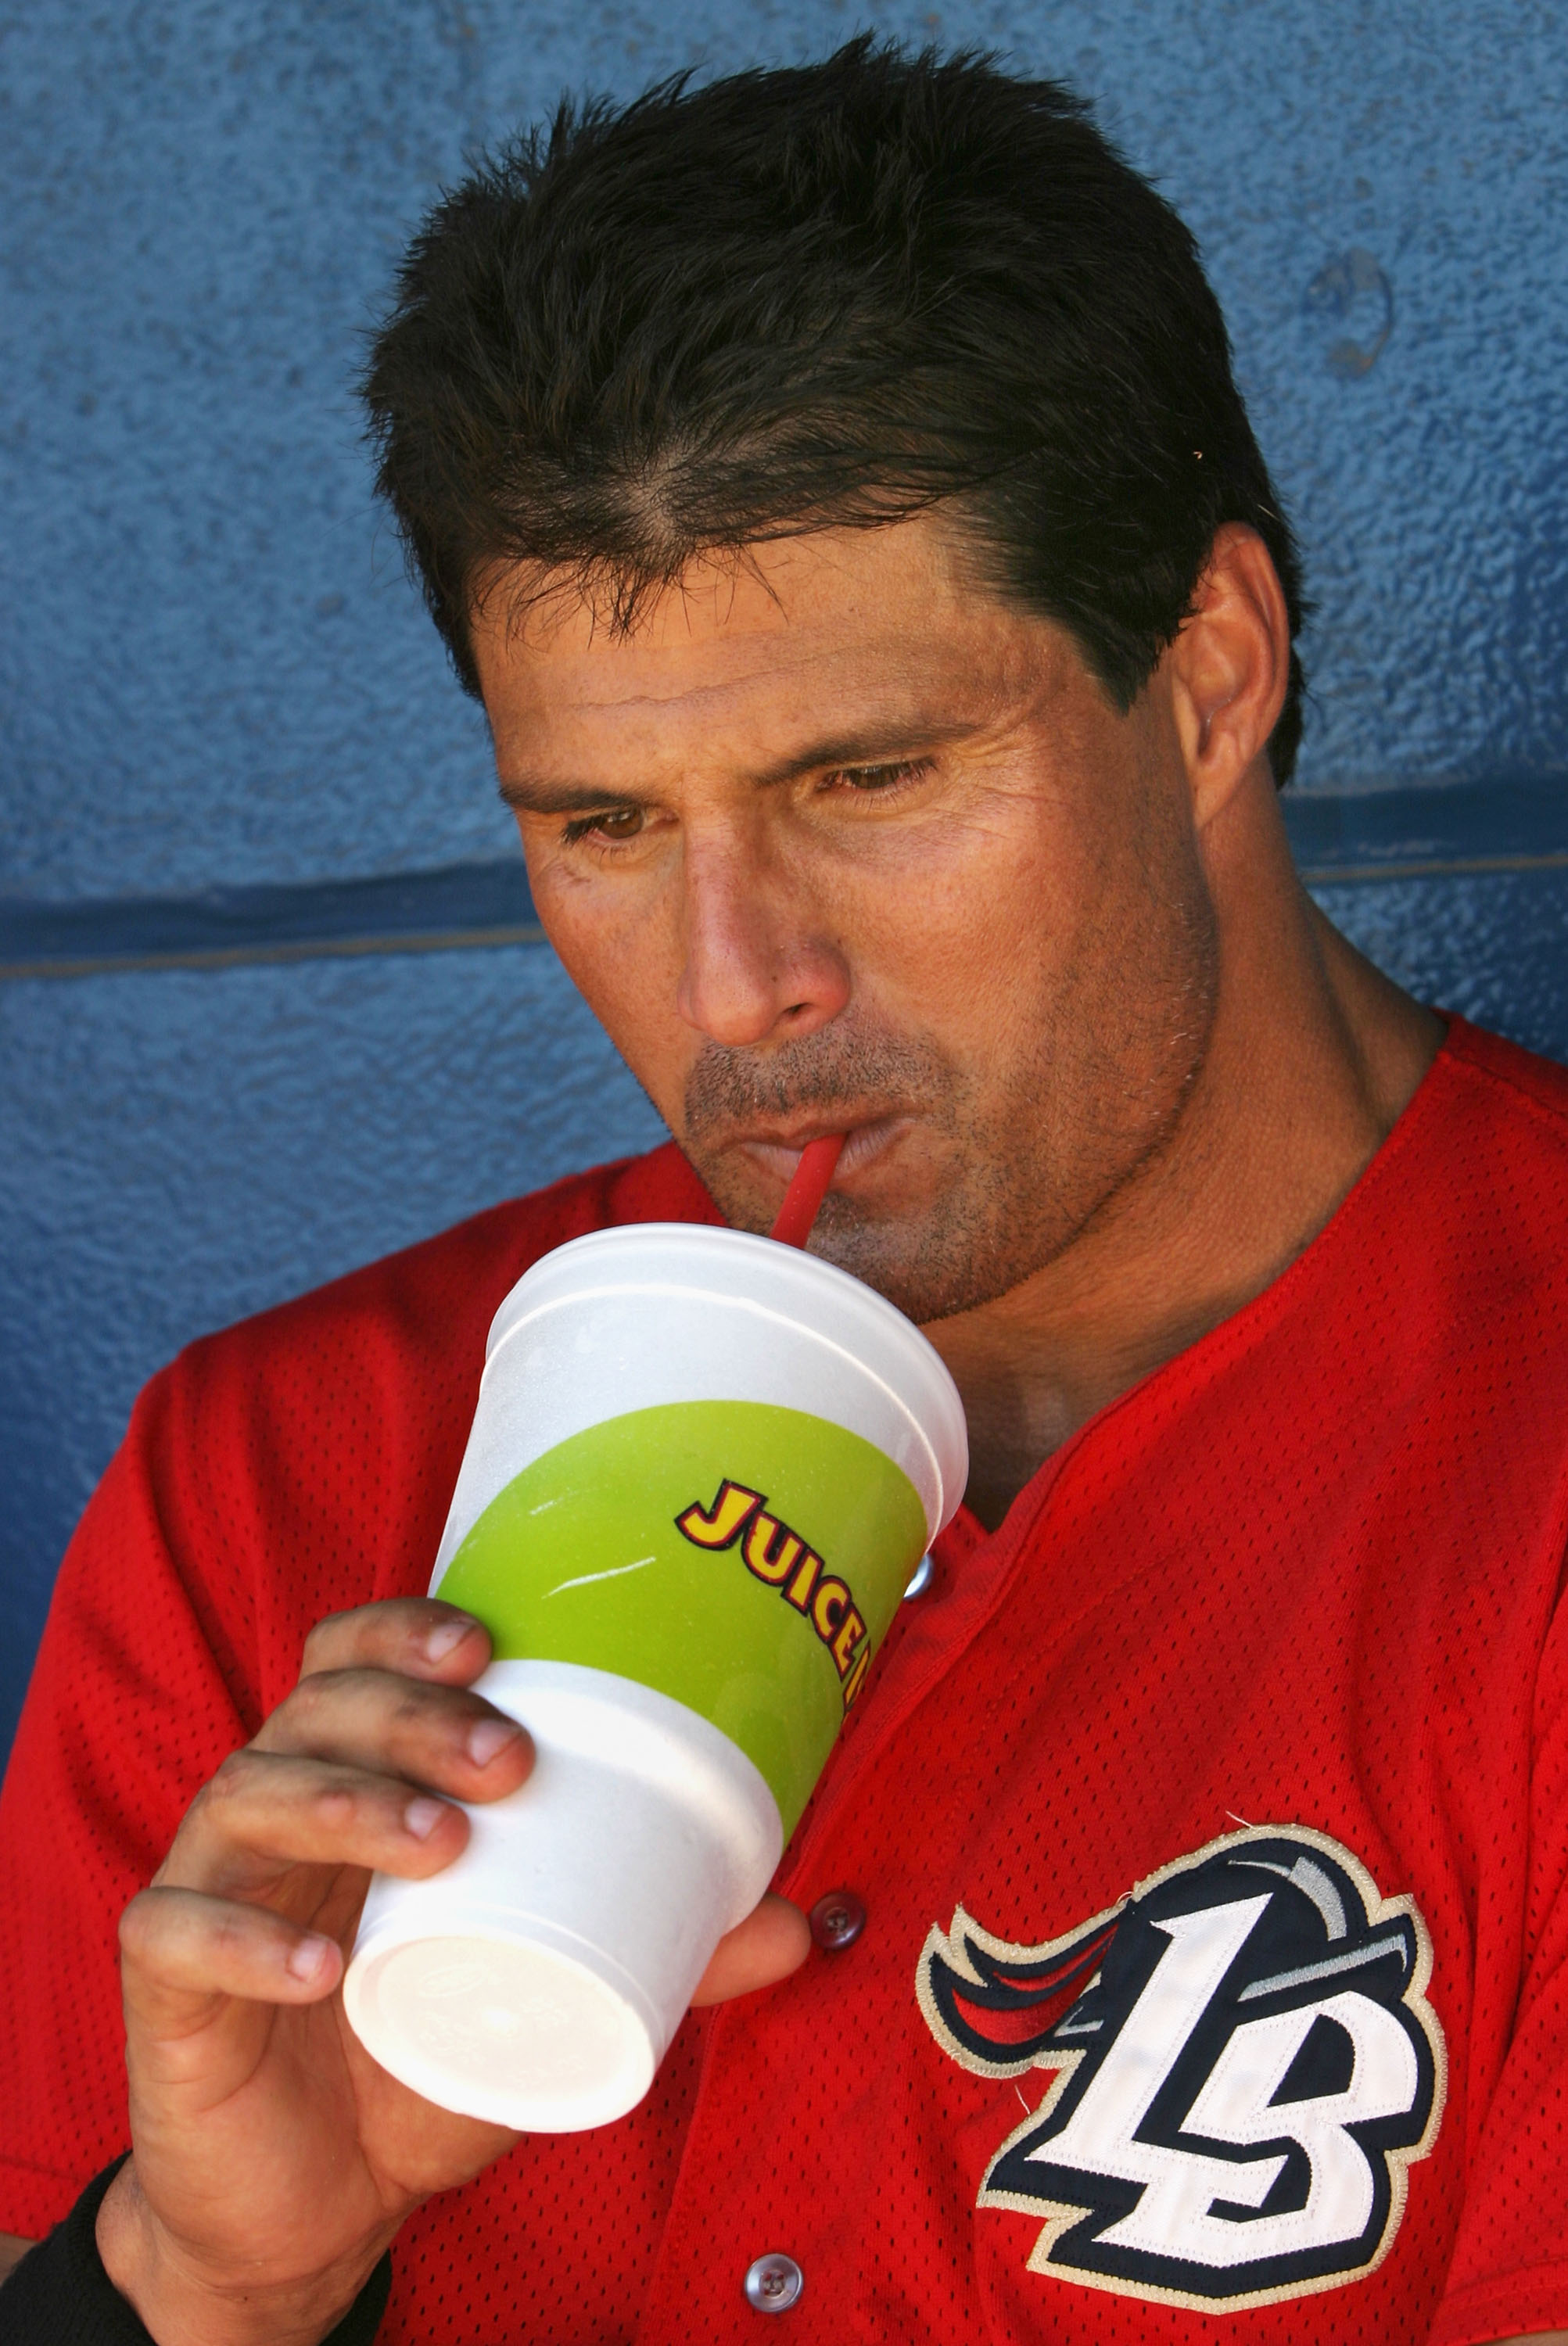 Jose Canseco's 20 Craziest Moments